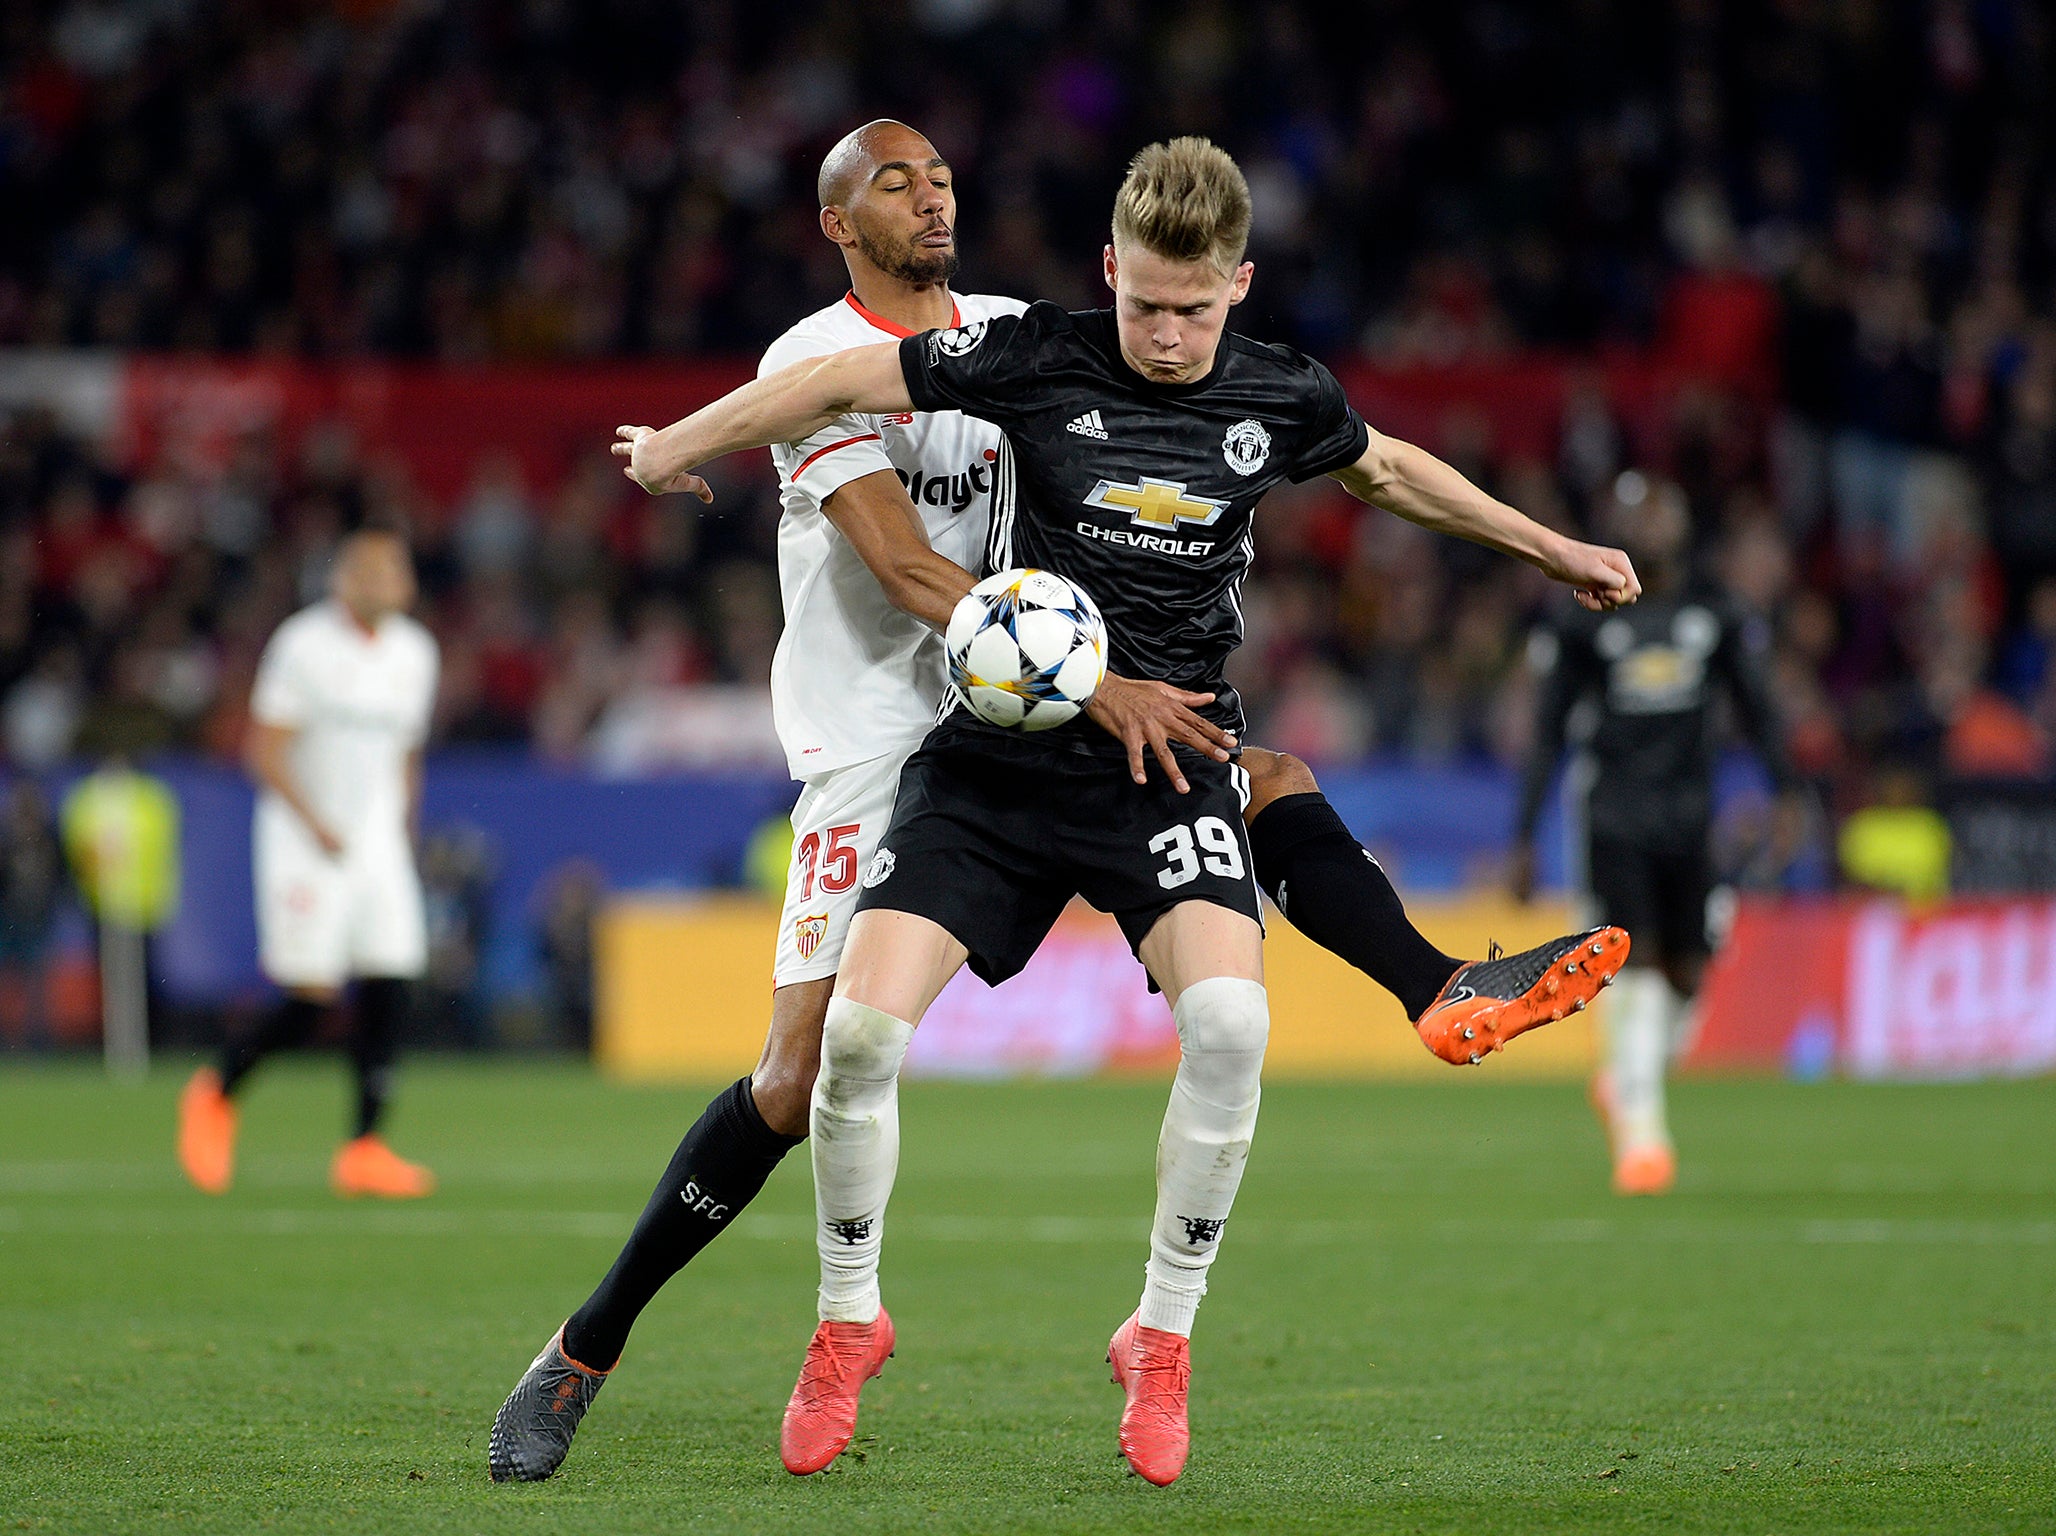 McTominay started in the middle of the park